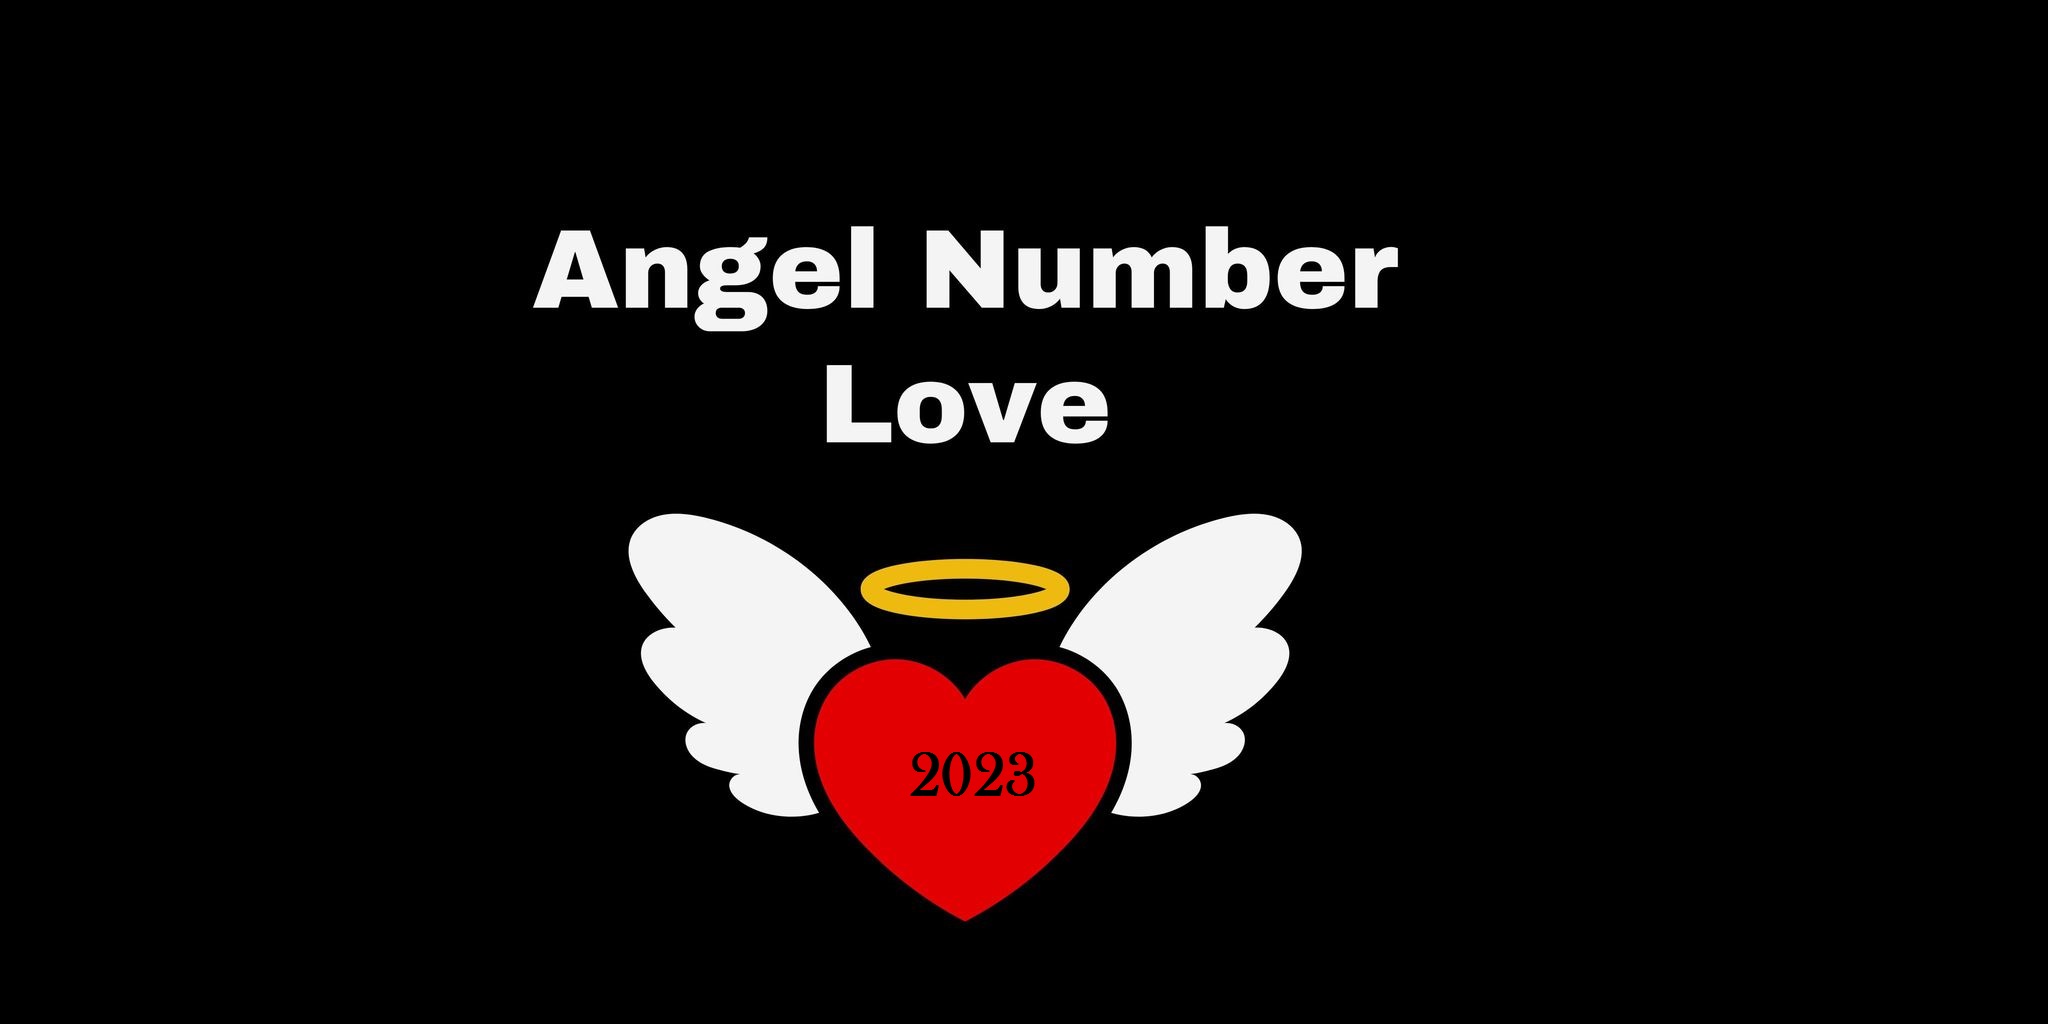 2023 Angel Number Meaning In Love